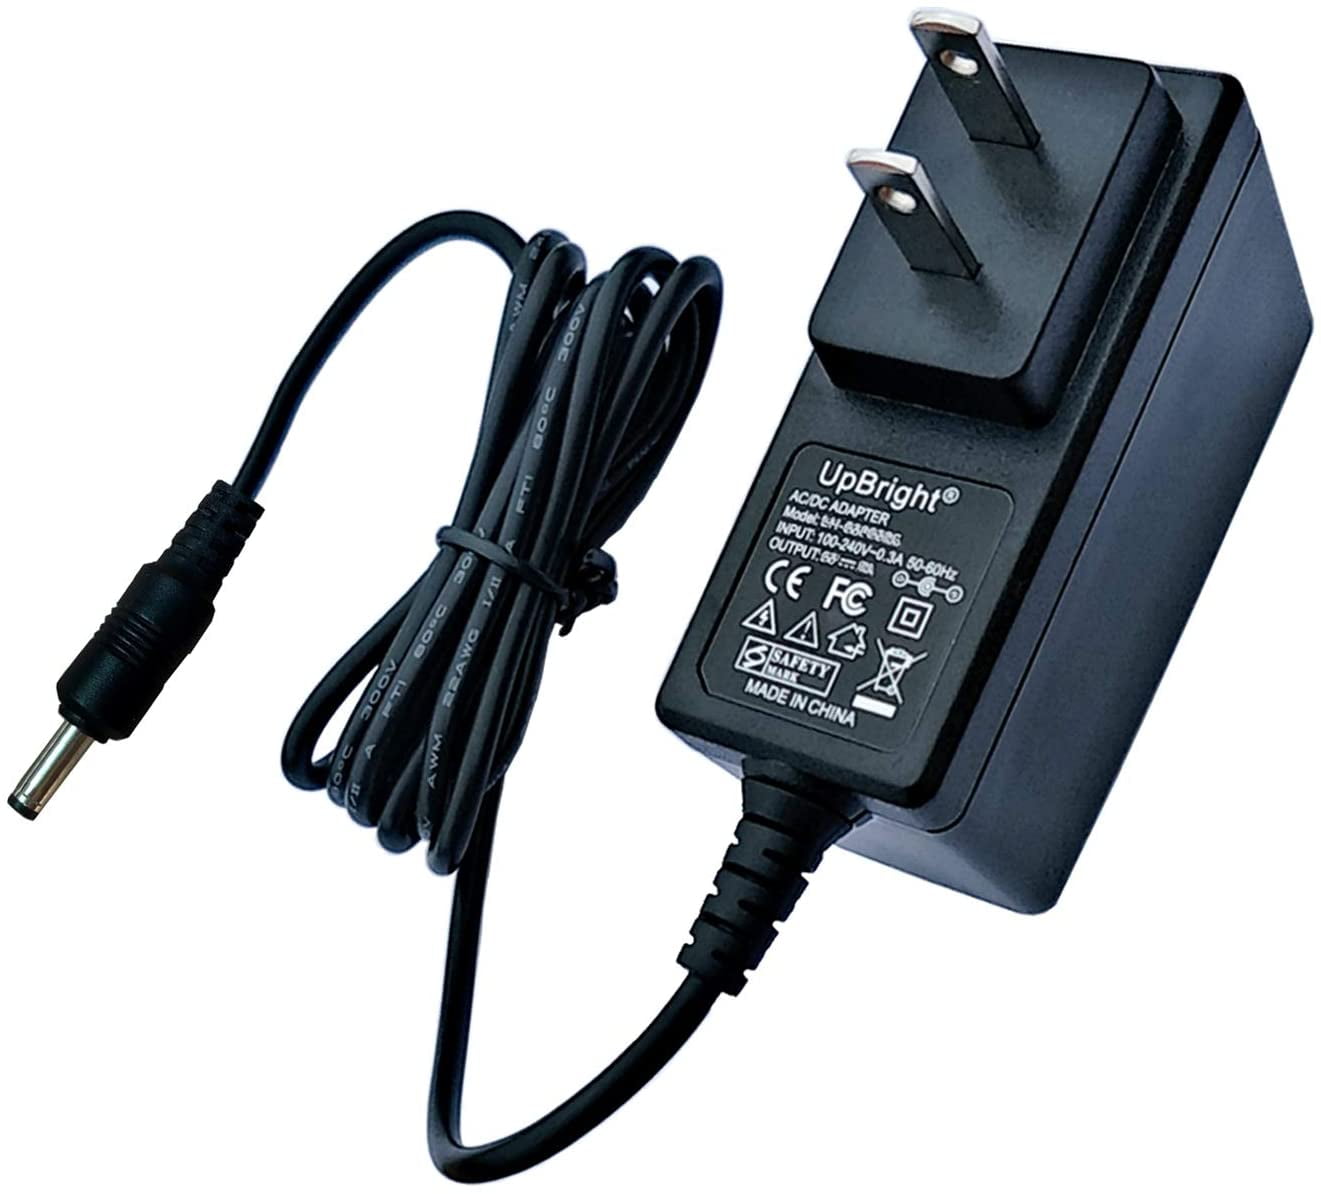 MyVolts 9V in-car Power Supply Adaptor Compatible with Asda PTDVD7 DVD  Player